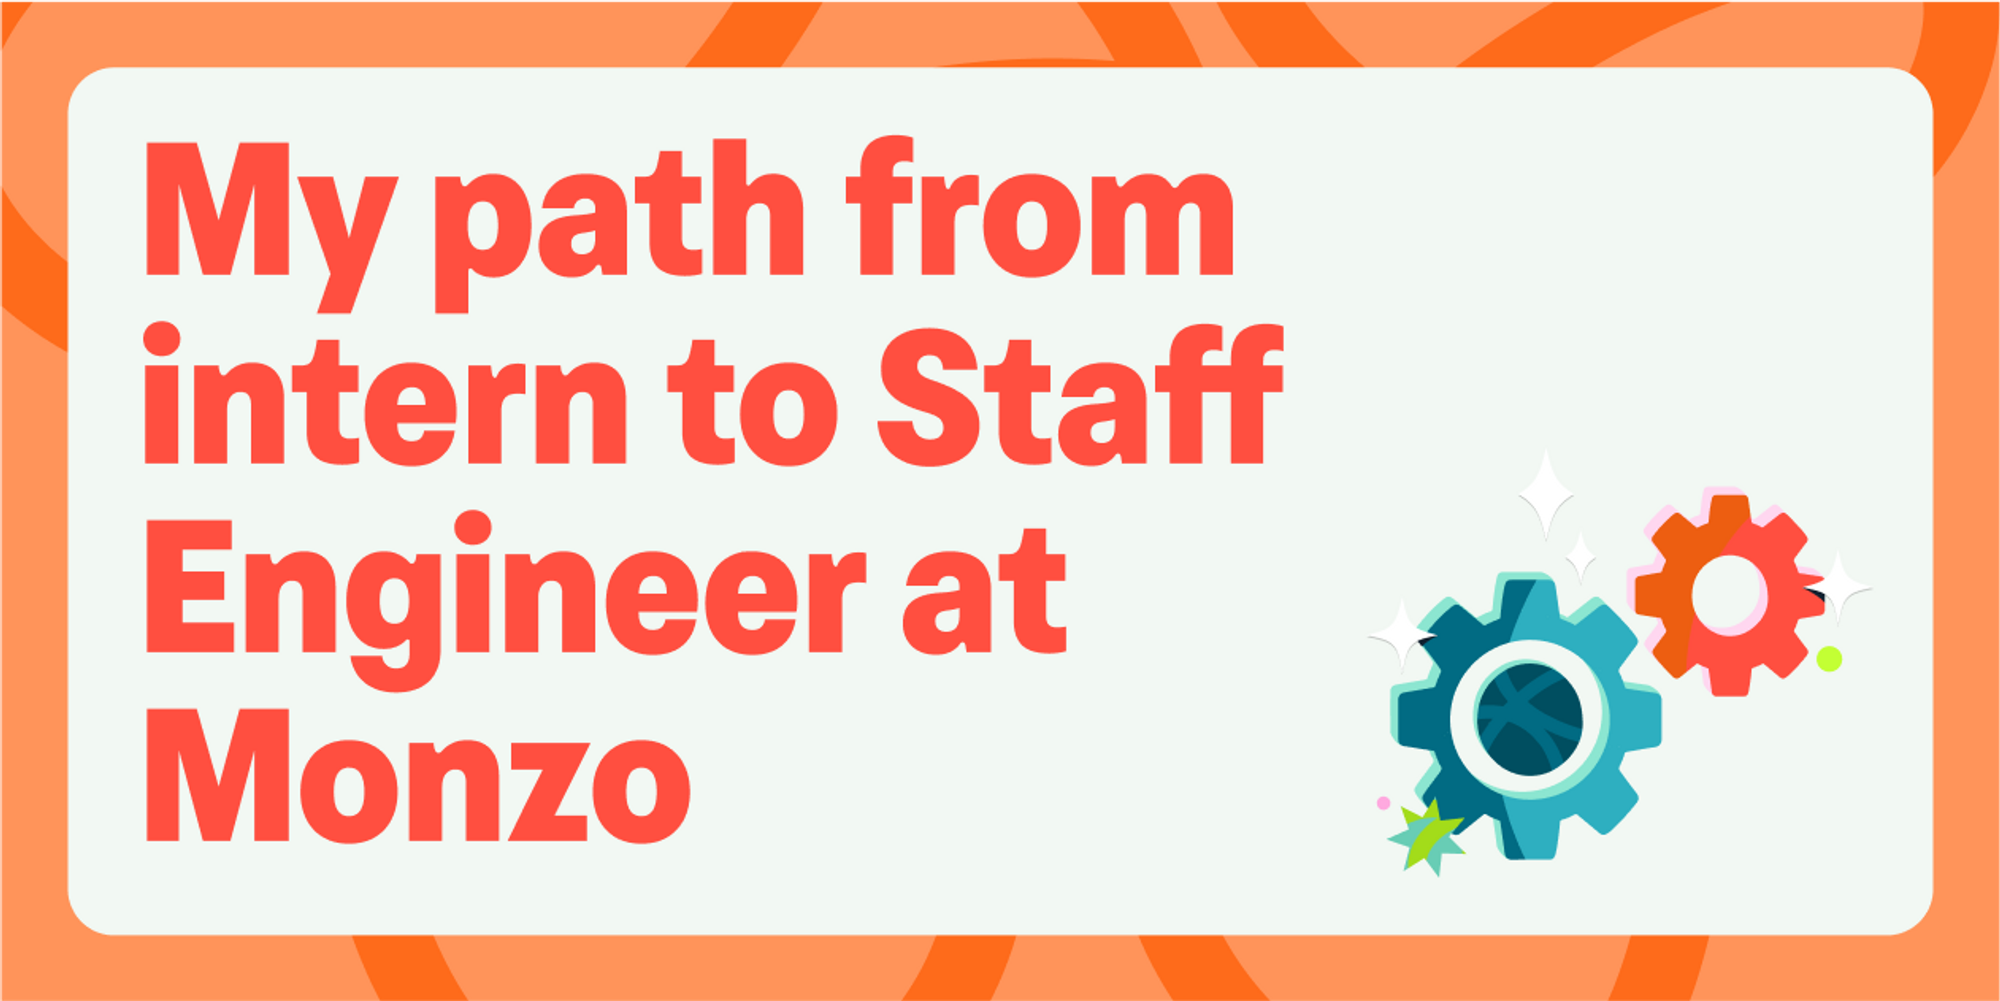 Orange text reads: My path from Intern to Staff Engineer at Monzo